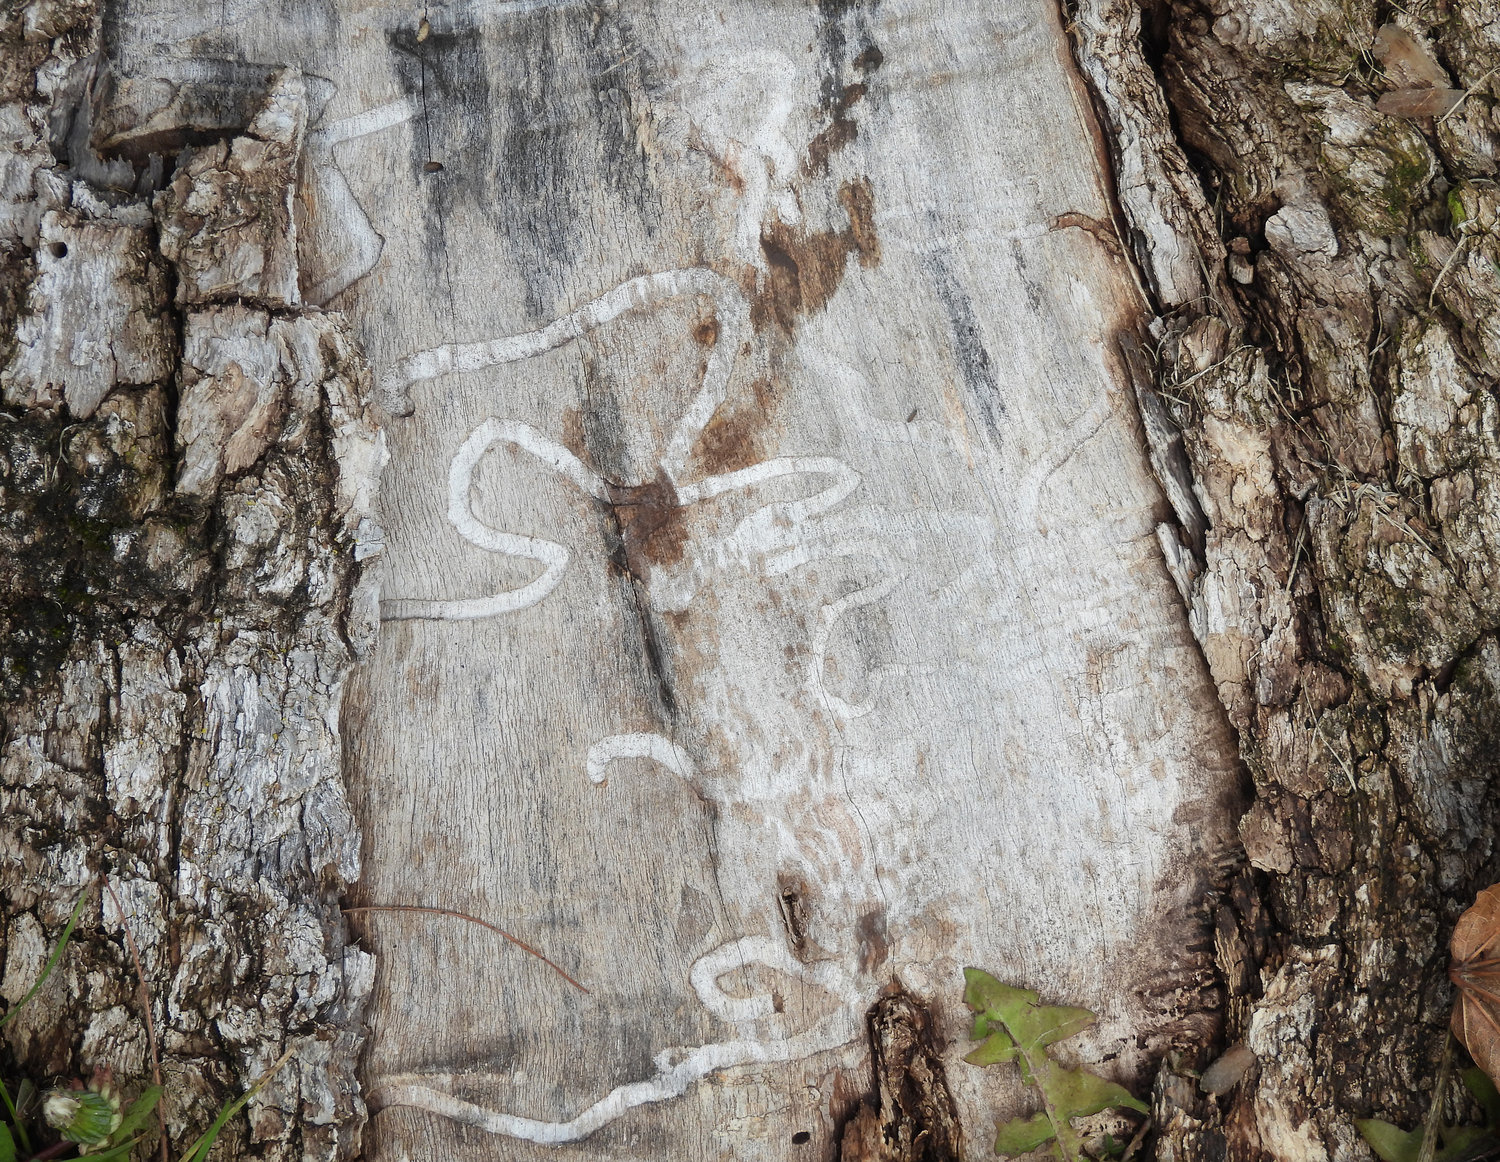 TANGLED PATHS — A clear sign of emerald ash borers, the stump of an ash tree in Lincoln Park shows the distinct winding pattern the larva makes as it feeds on the tree.